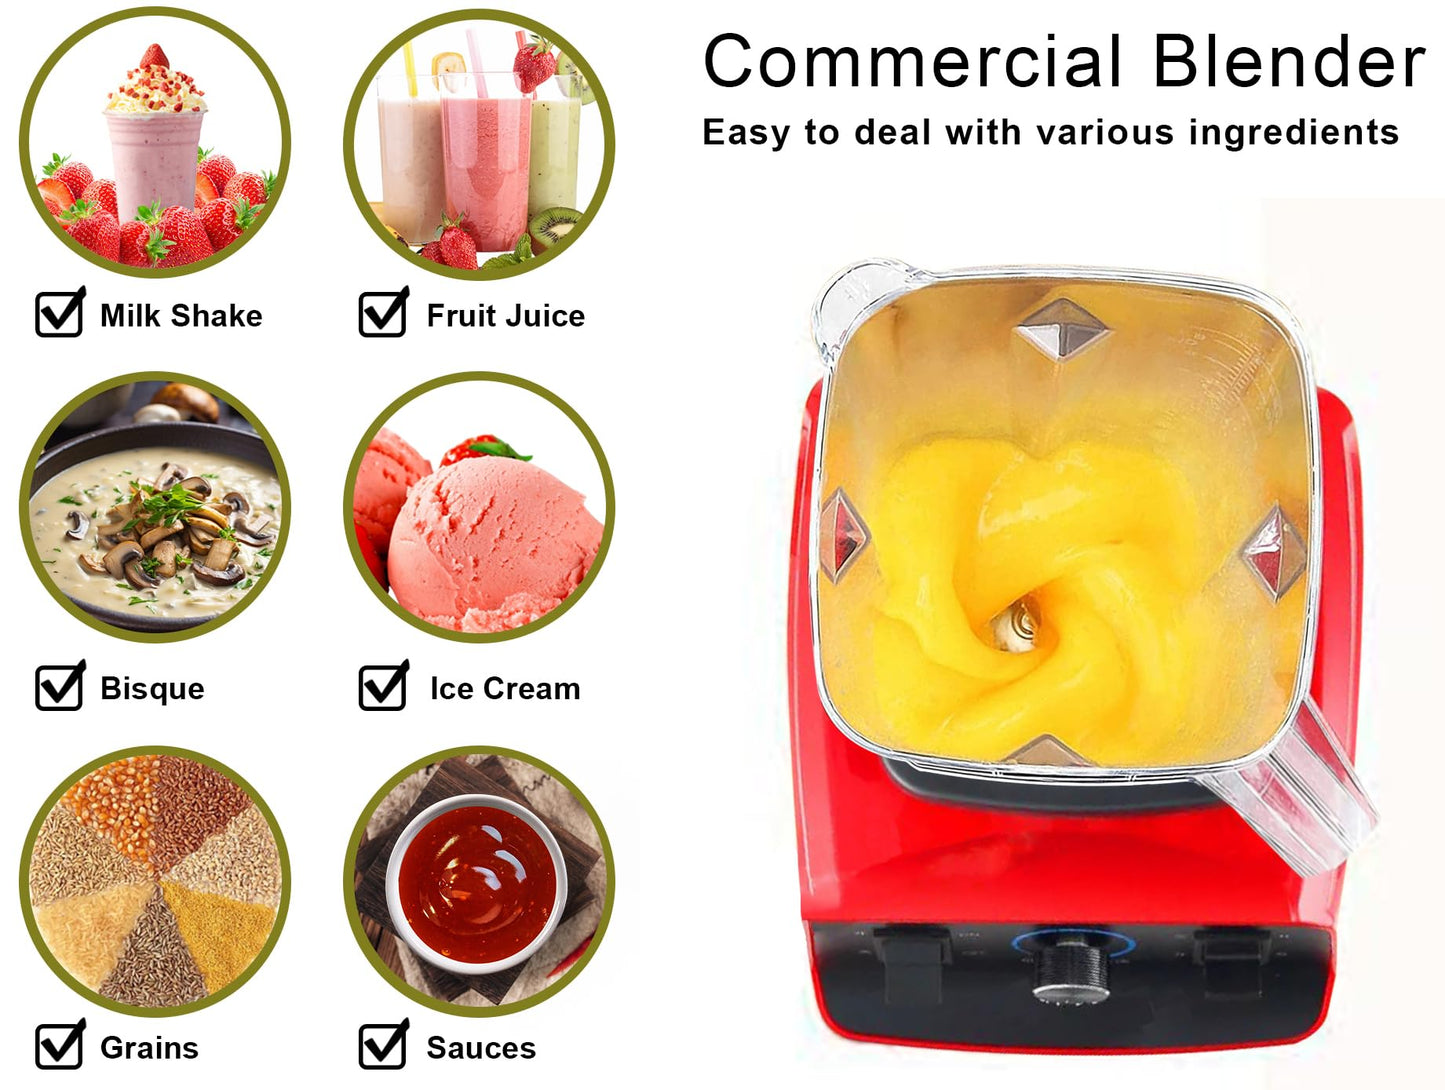 Professional high speed Blender, Personal Blender for Shakes and Smoothies,Powerful 4500-Watt Blender for Juice, Stainless Steel Blades, Easy Self-Cleaning, red